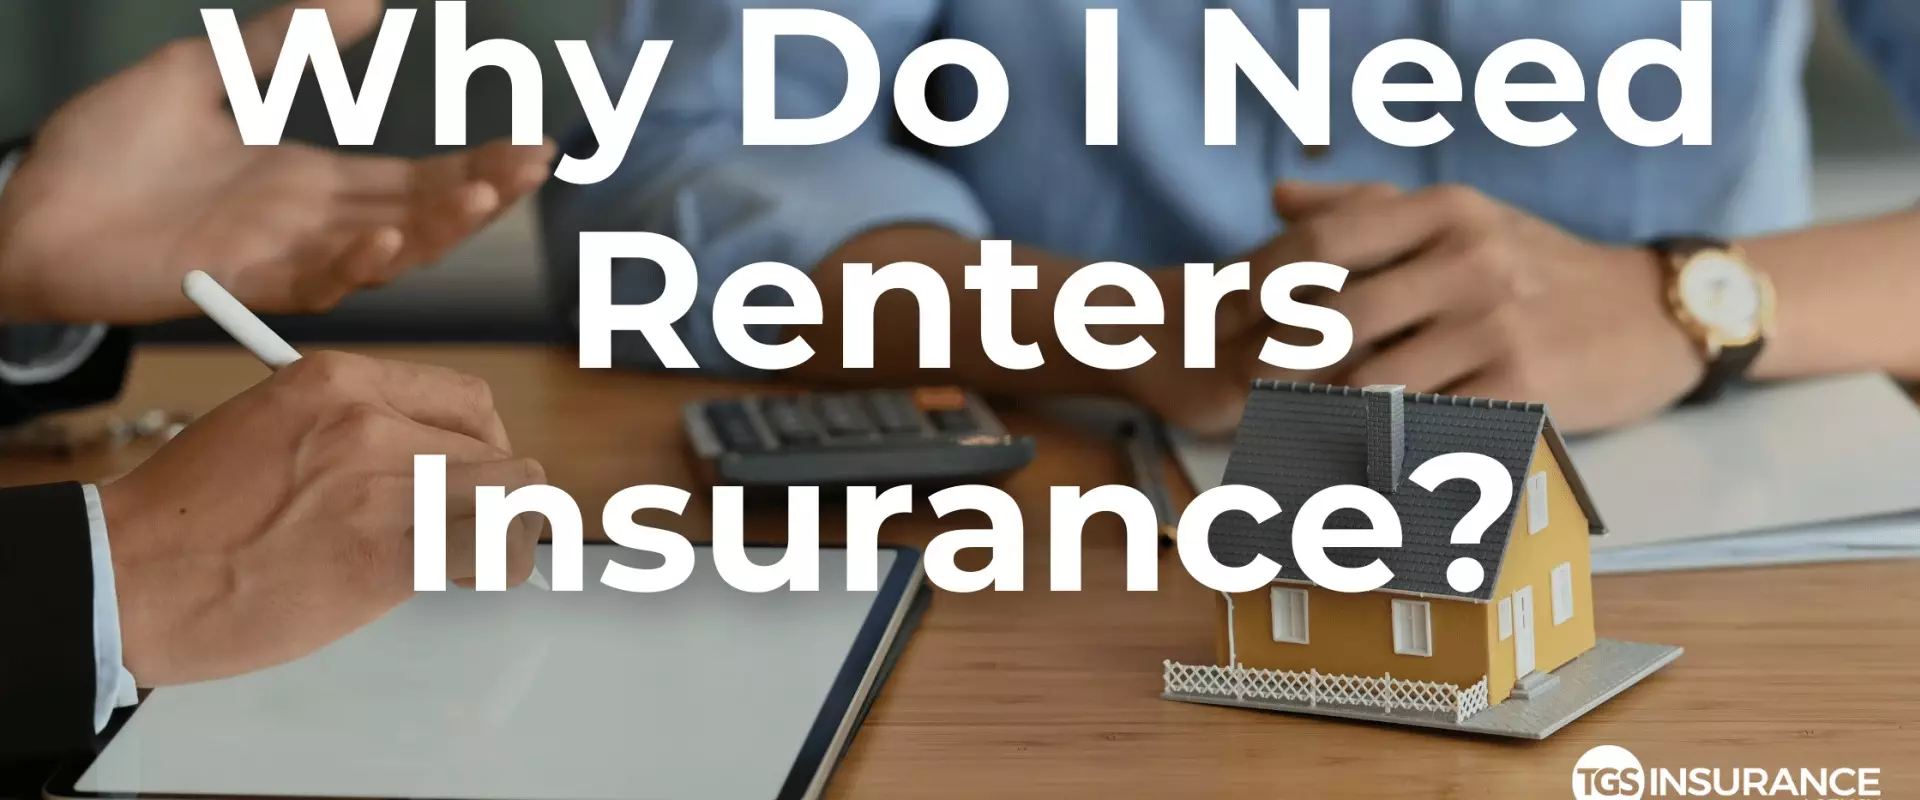 Why is renter’s insurance necessary?